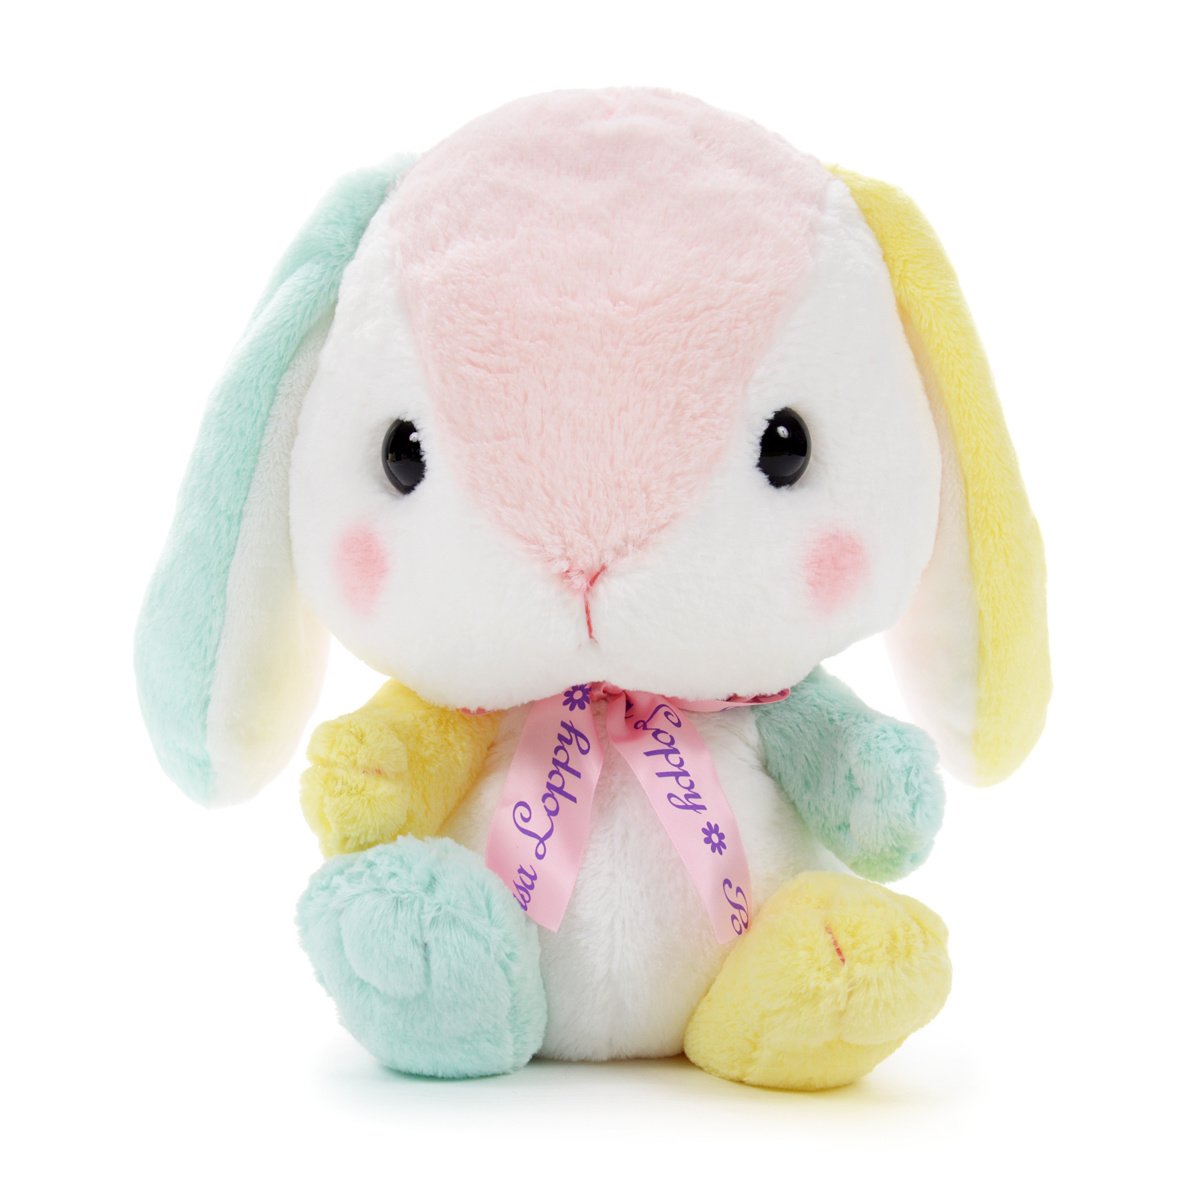 Plush Bunny, Amuse, Pote Usa Loppy, Candy-chan, Mix, 16 Inches